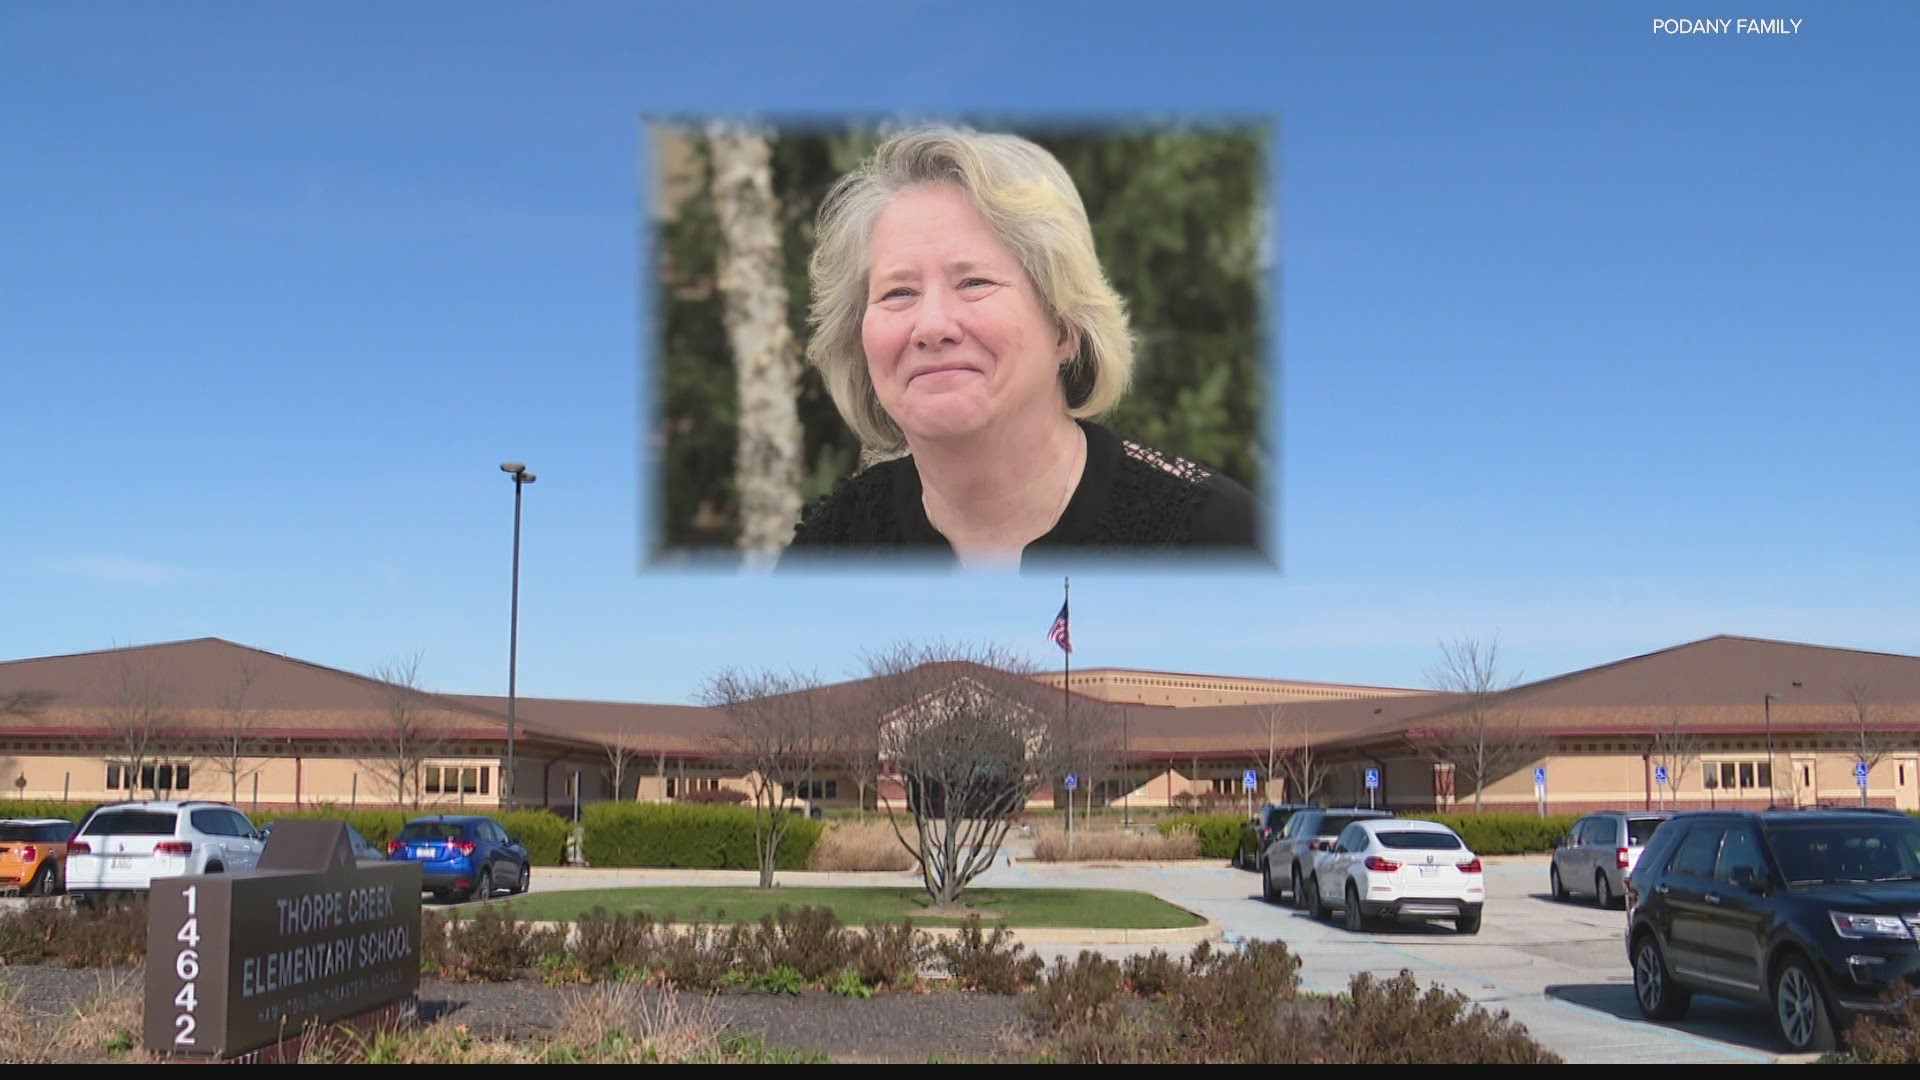 A staff member at Thorpe Creek Elementary School in Fishers has died from COVID-19, according to the superintendent.